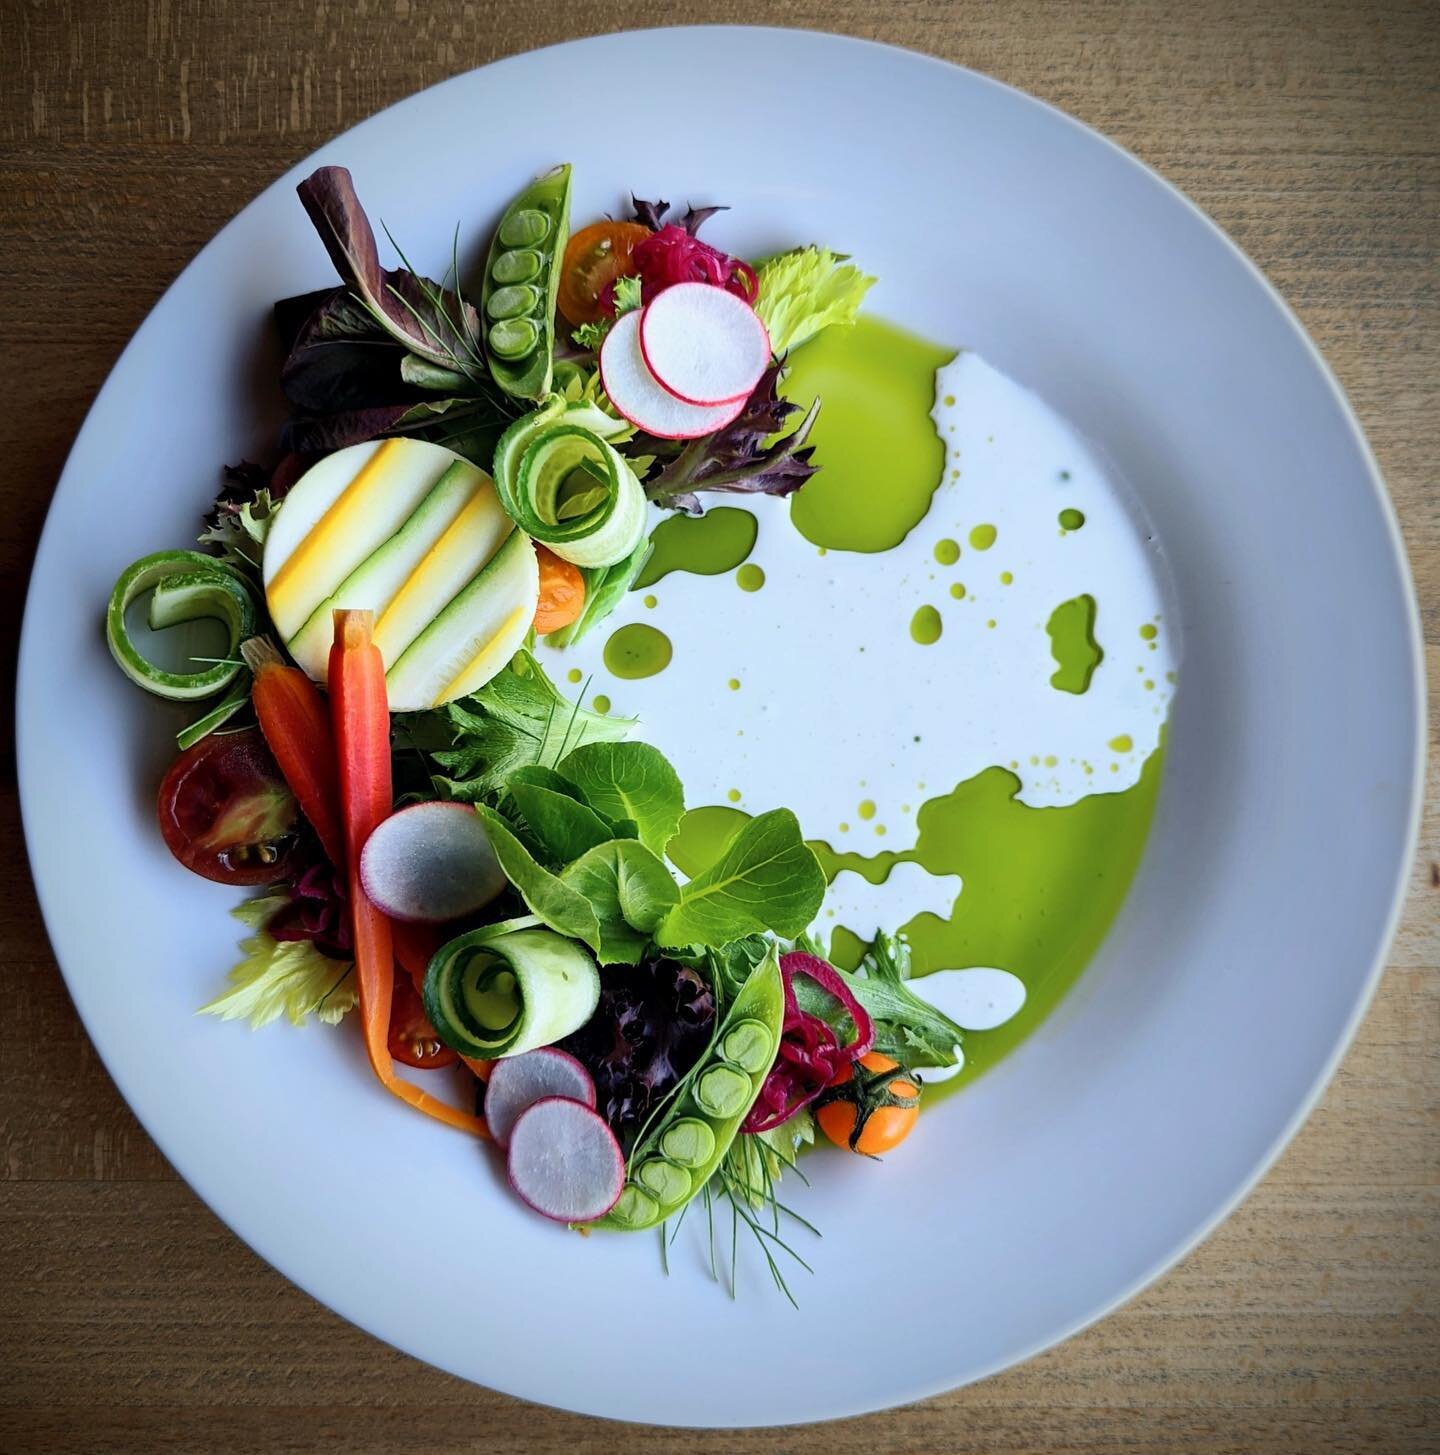 SUMMER VEGETABLE SALAD
🔸local heirloom cherry tomatoes 🔸greens 🔸pickled carrots 🔸zucchini 🔸baby cucumber 🔸sugar snap peas🔸chef&rsquo;s fancy ranch: kefir, black pepper herb oil dressing 
#summeronaplate 
Too beautiful not to share last week&rs